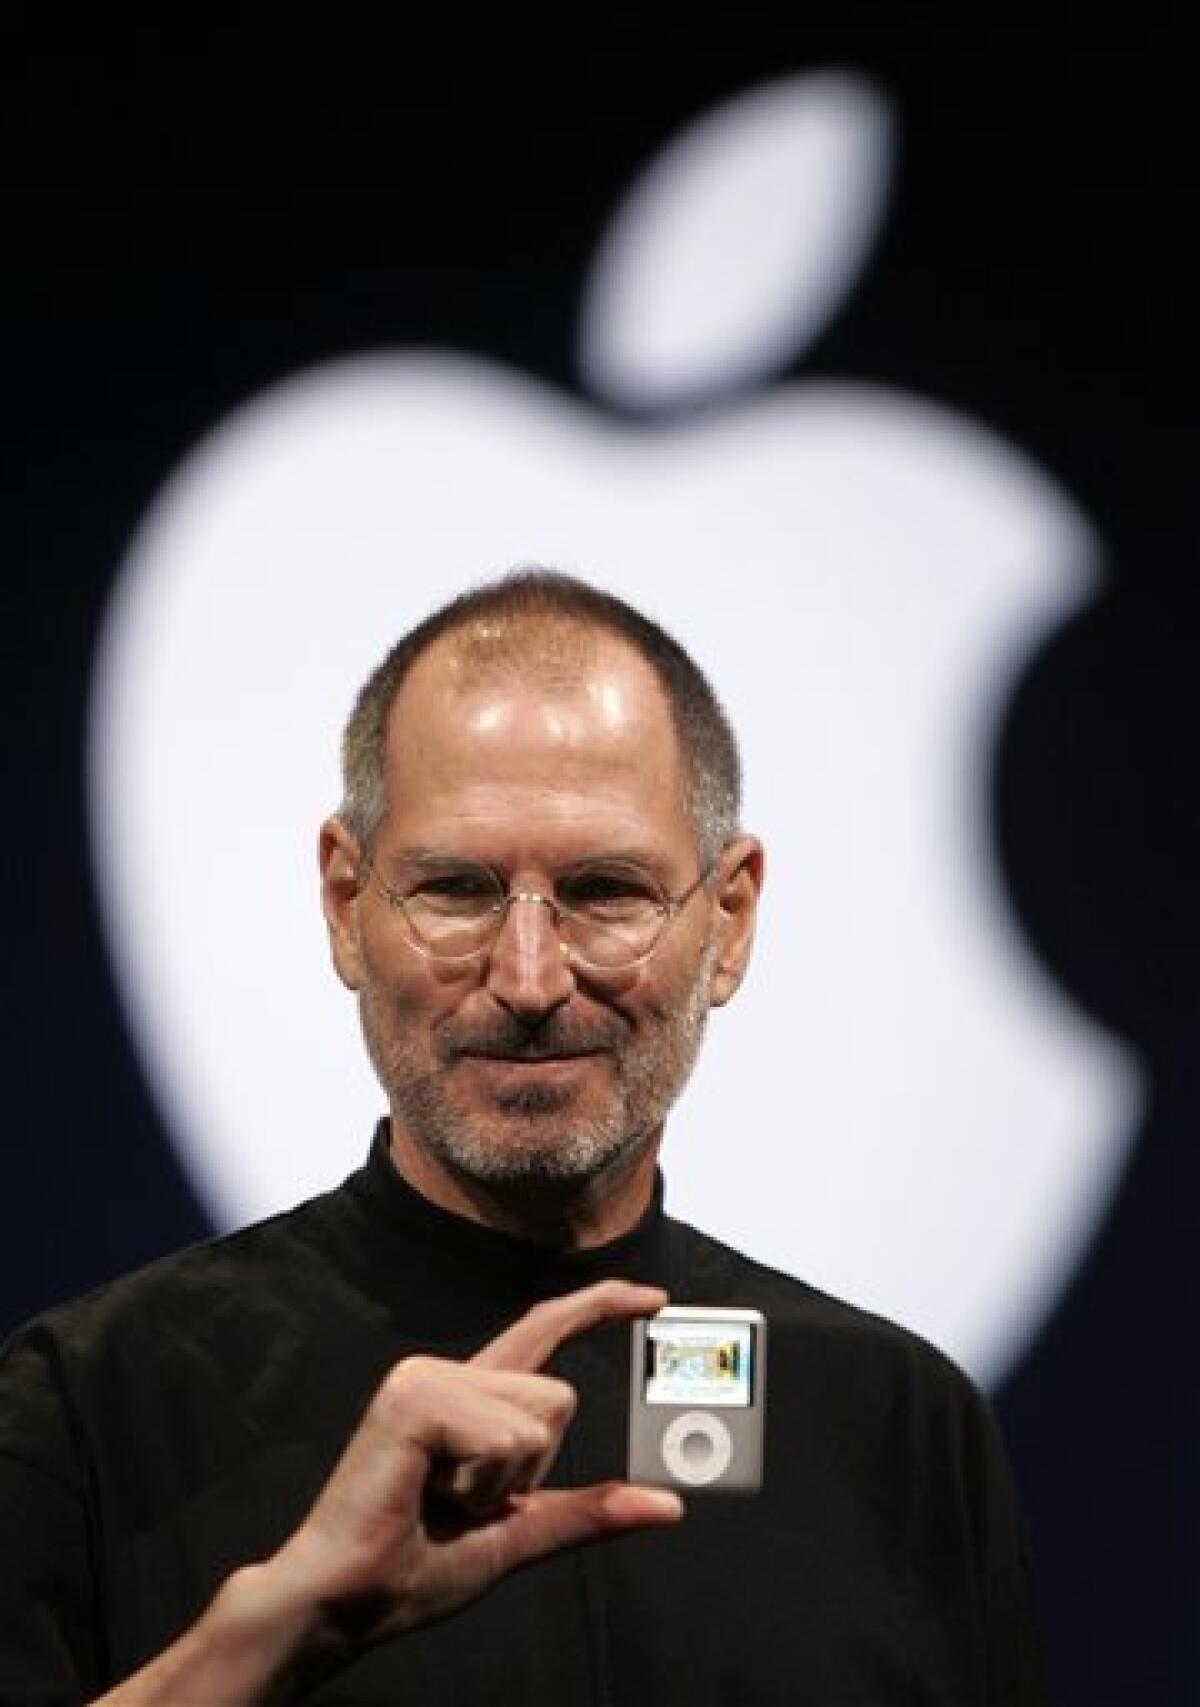 Key dates from the life and work of Steve Jobs - The San Diego